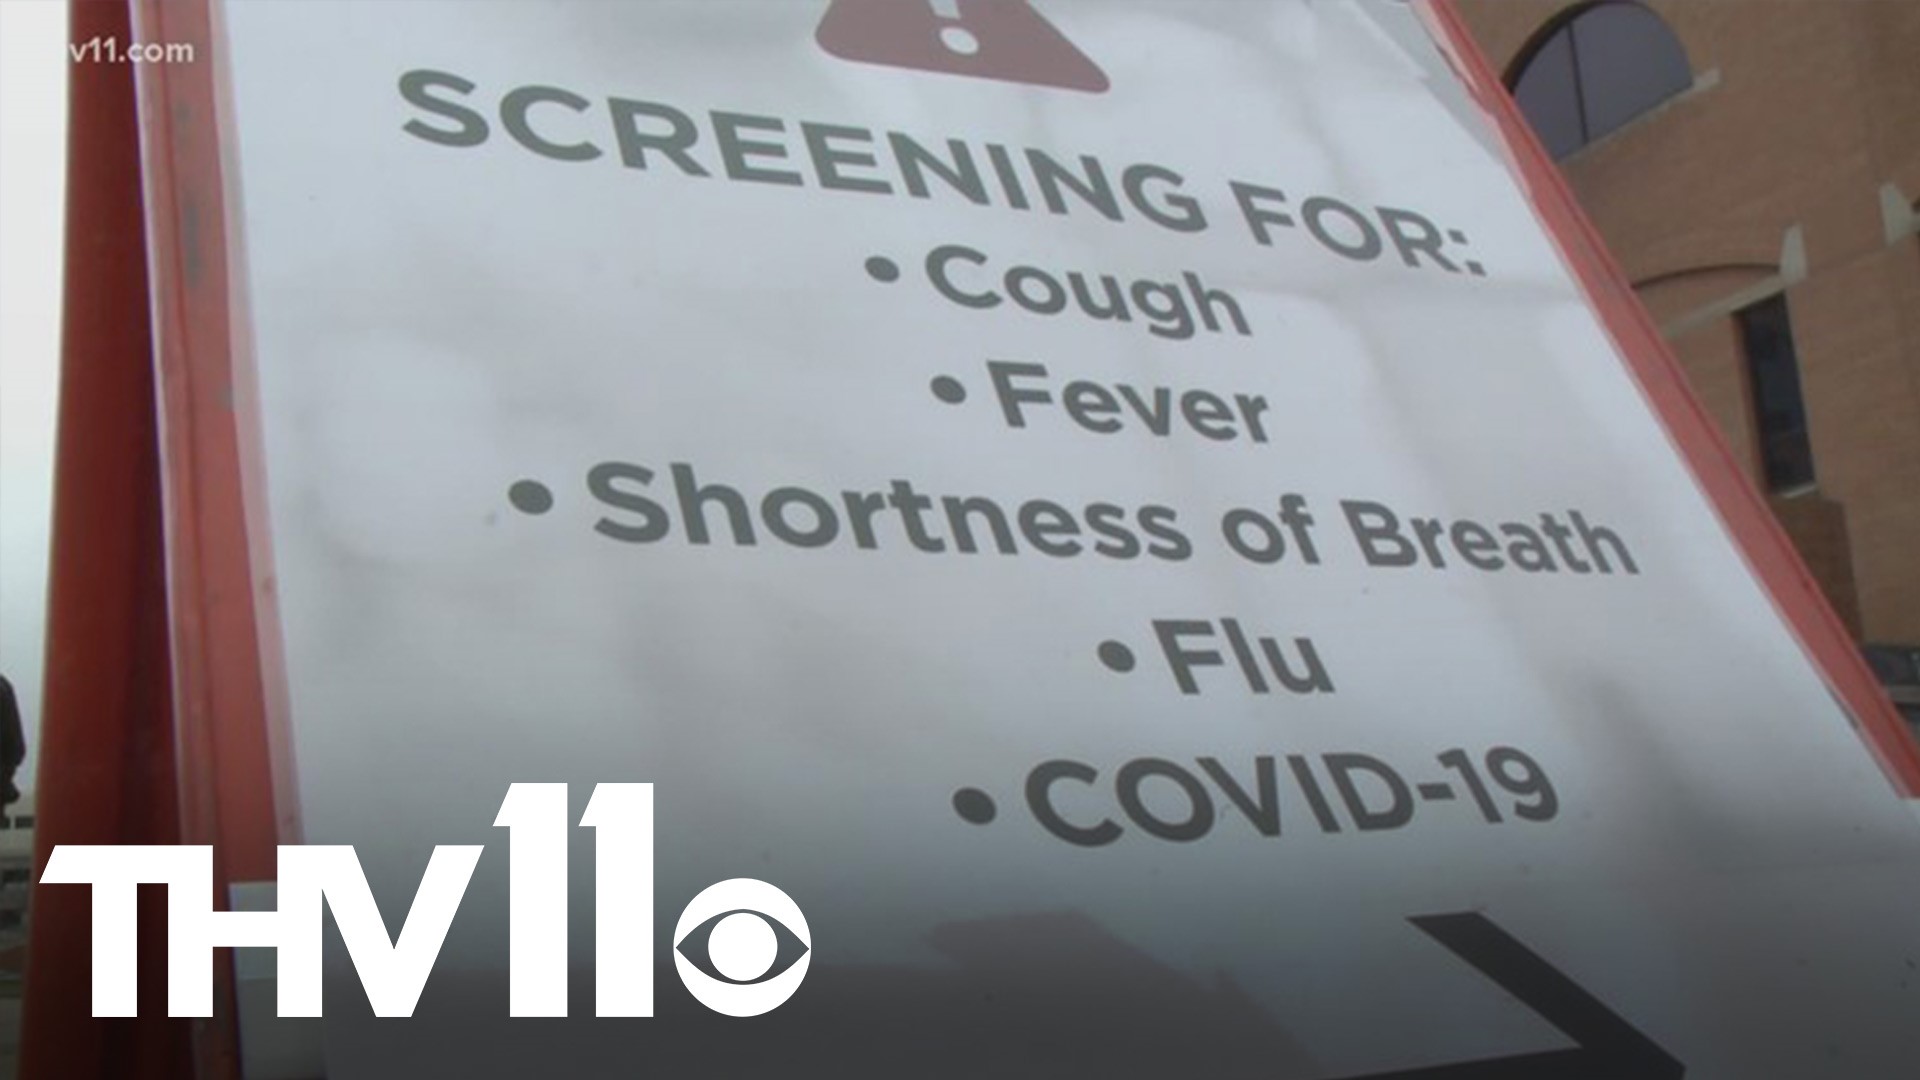 Gatherings and travel following Thanksgiving has doctors worried COVID-19 cases will drastically spike in the weeks leading up to Christmas.